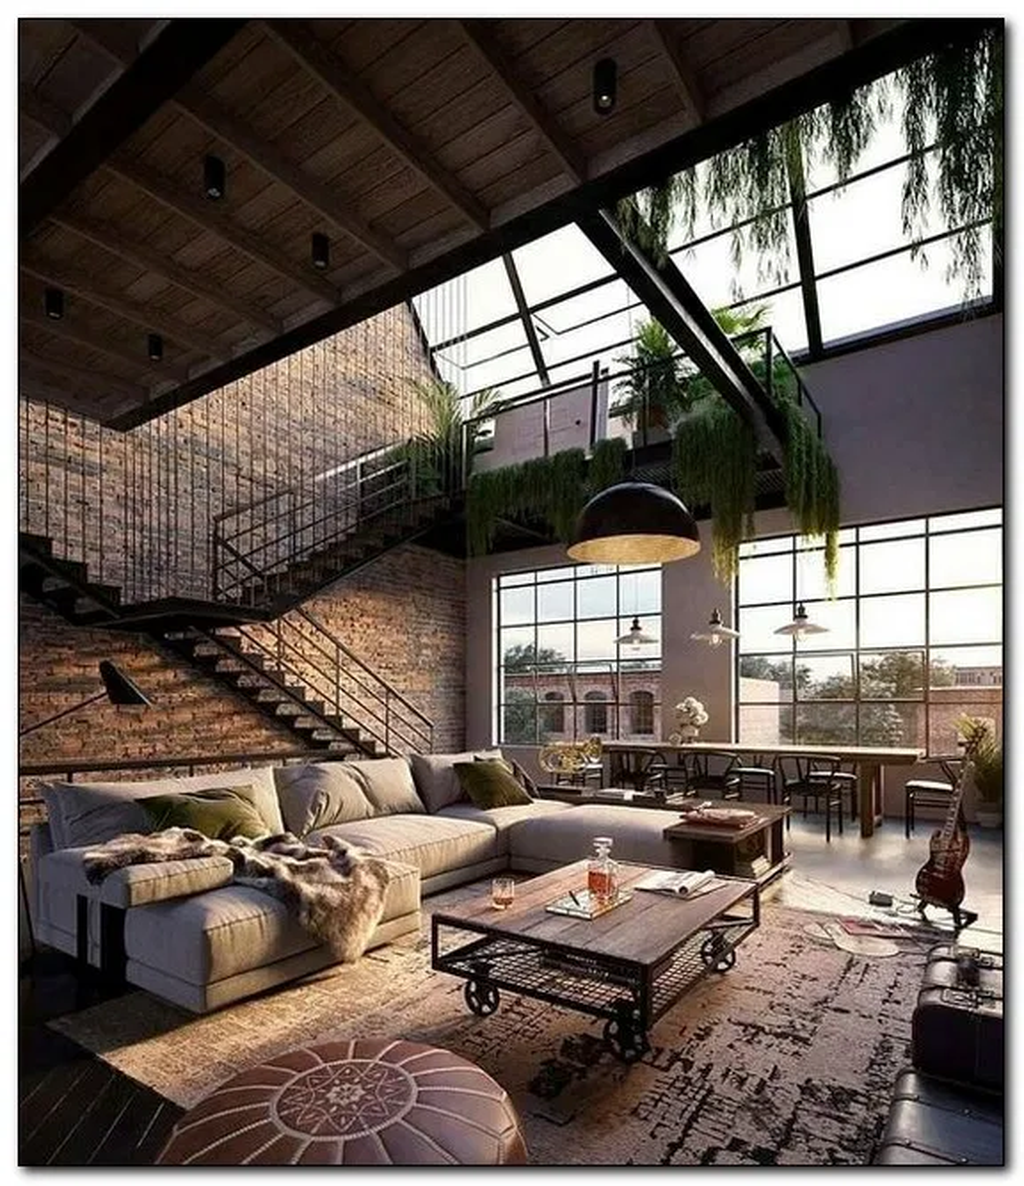 35 Awesome Loft Apartment Decorating Ideas - SWEETYHOMEE